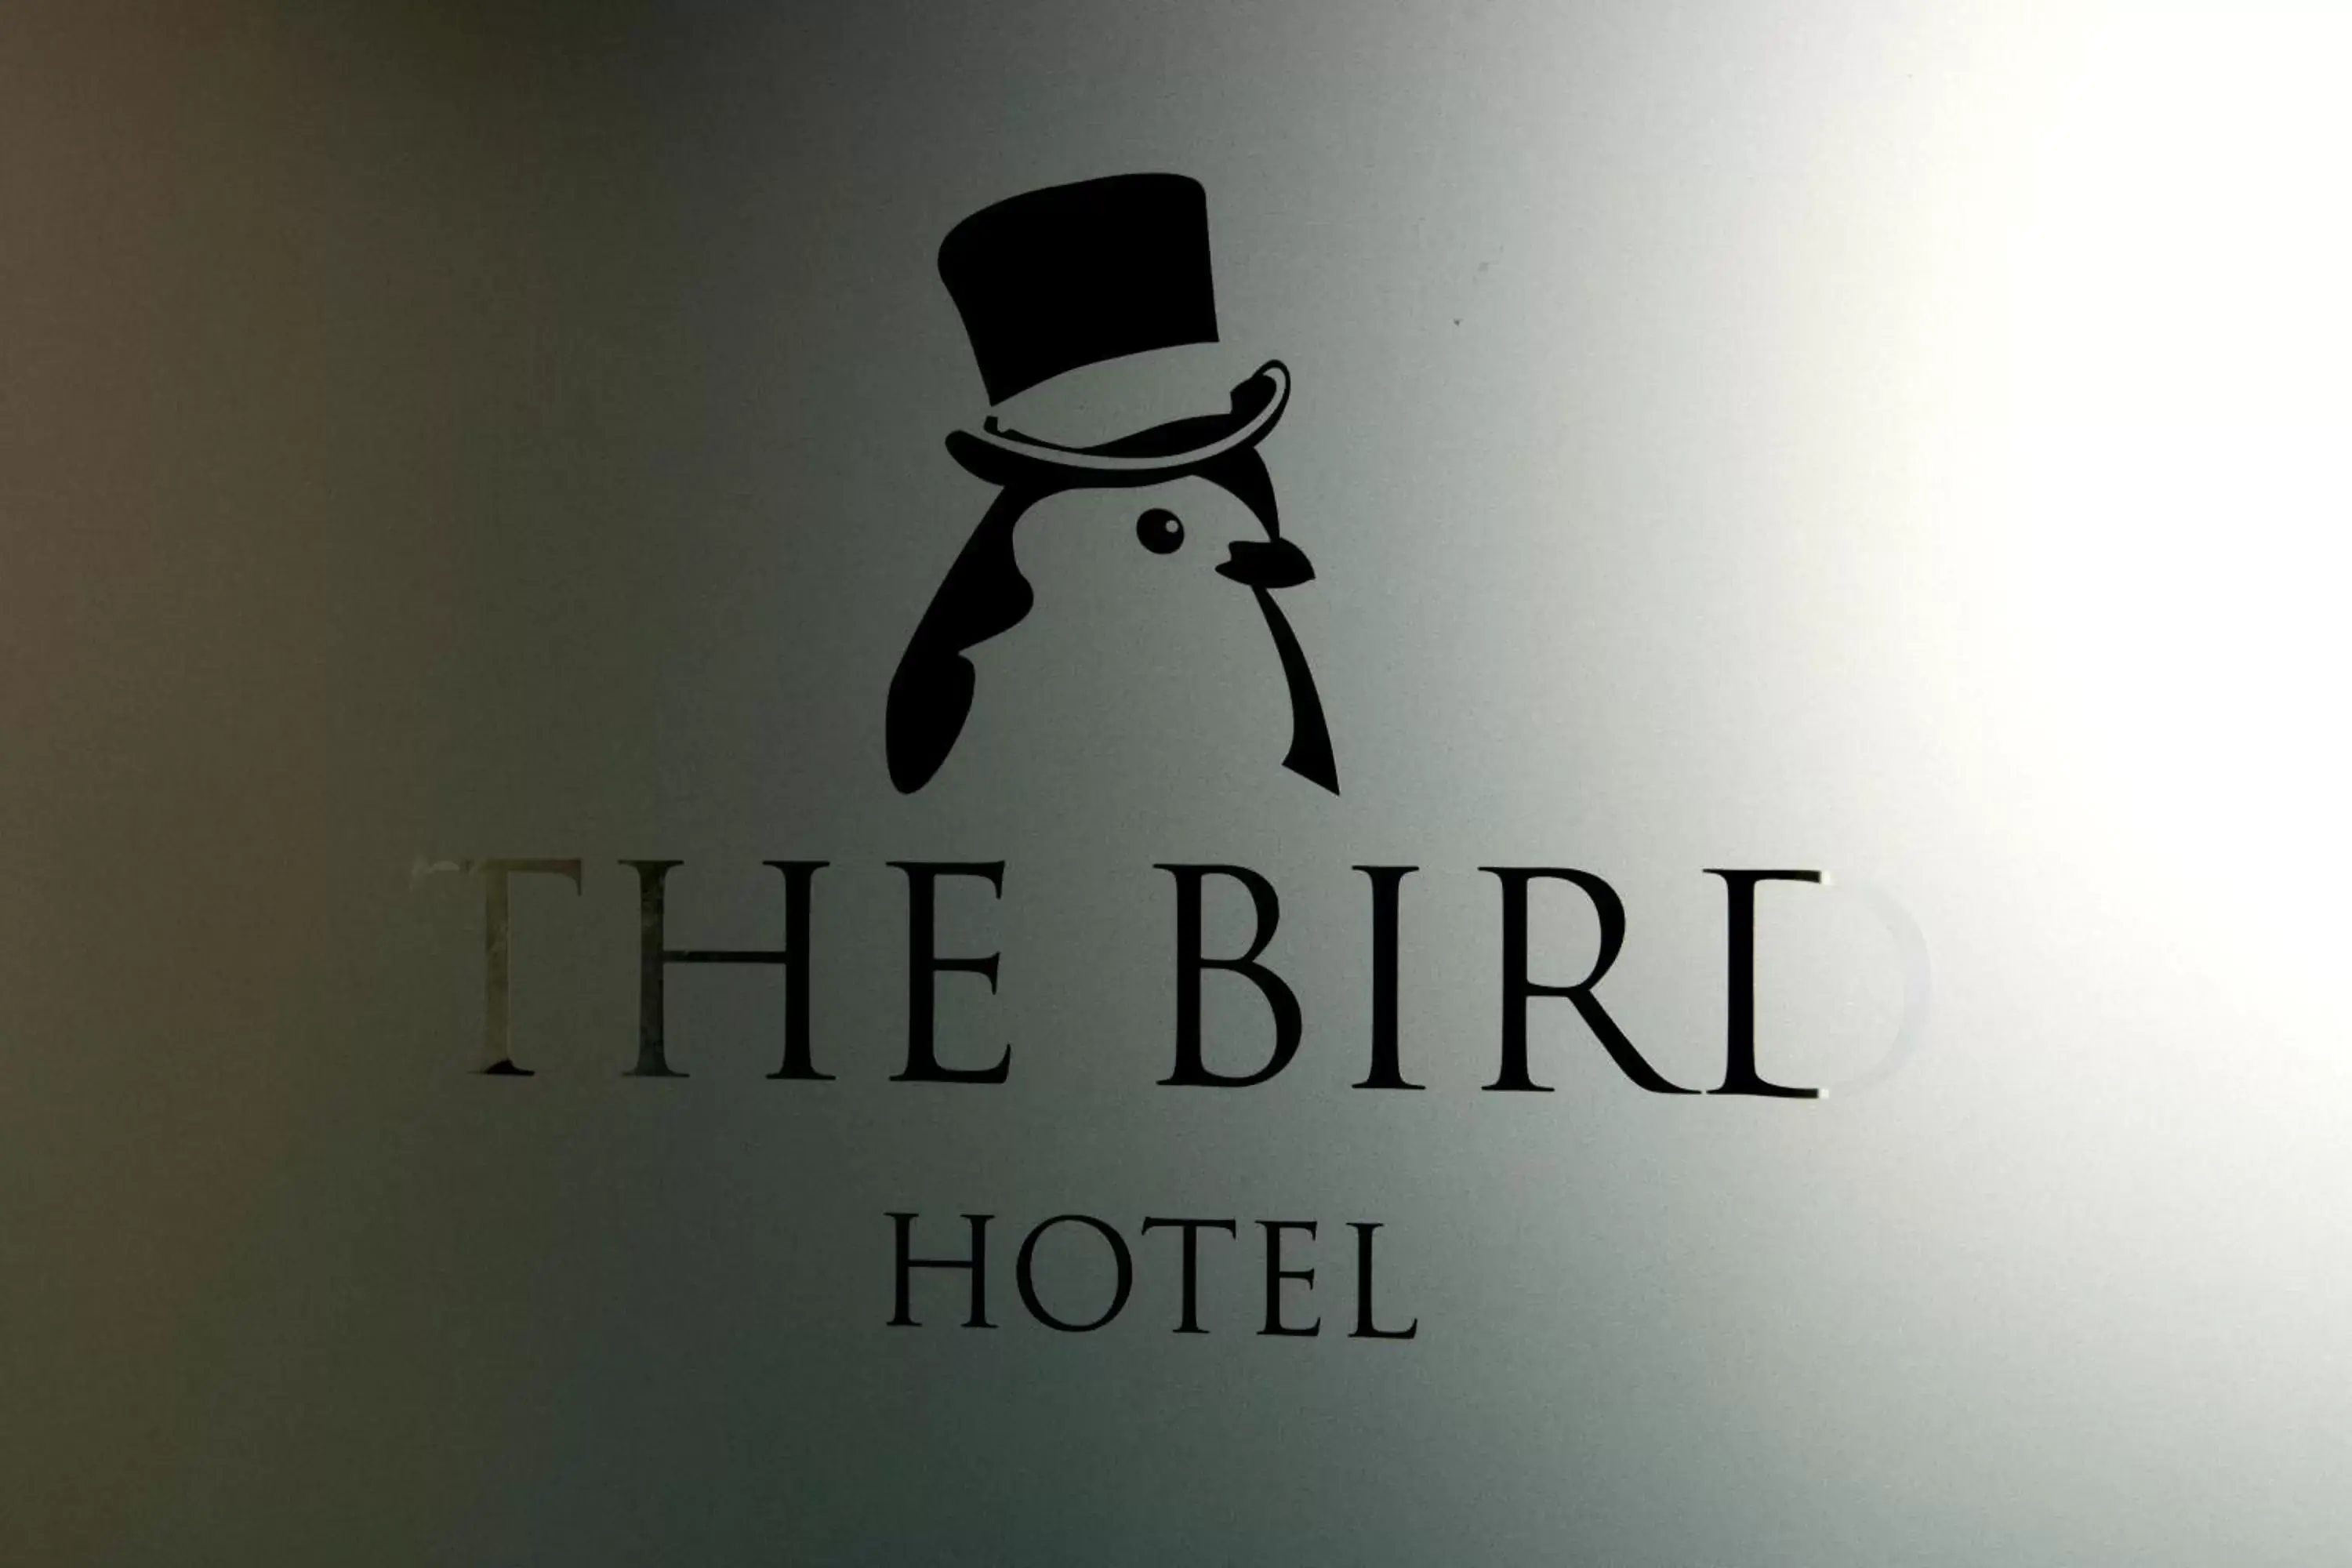 Property logo or sign, Property Logo/Sign in Hotel The Bird